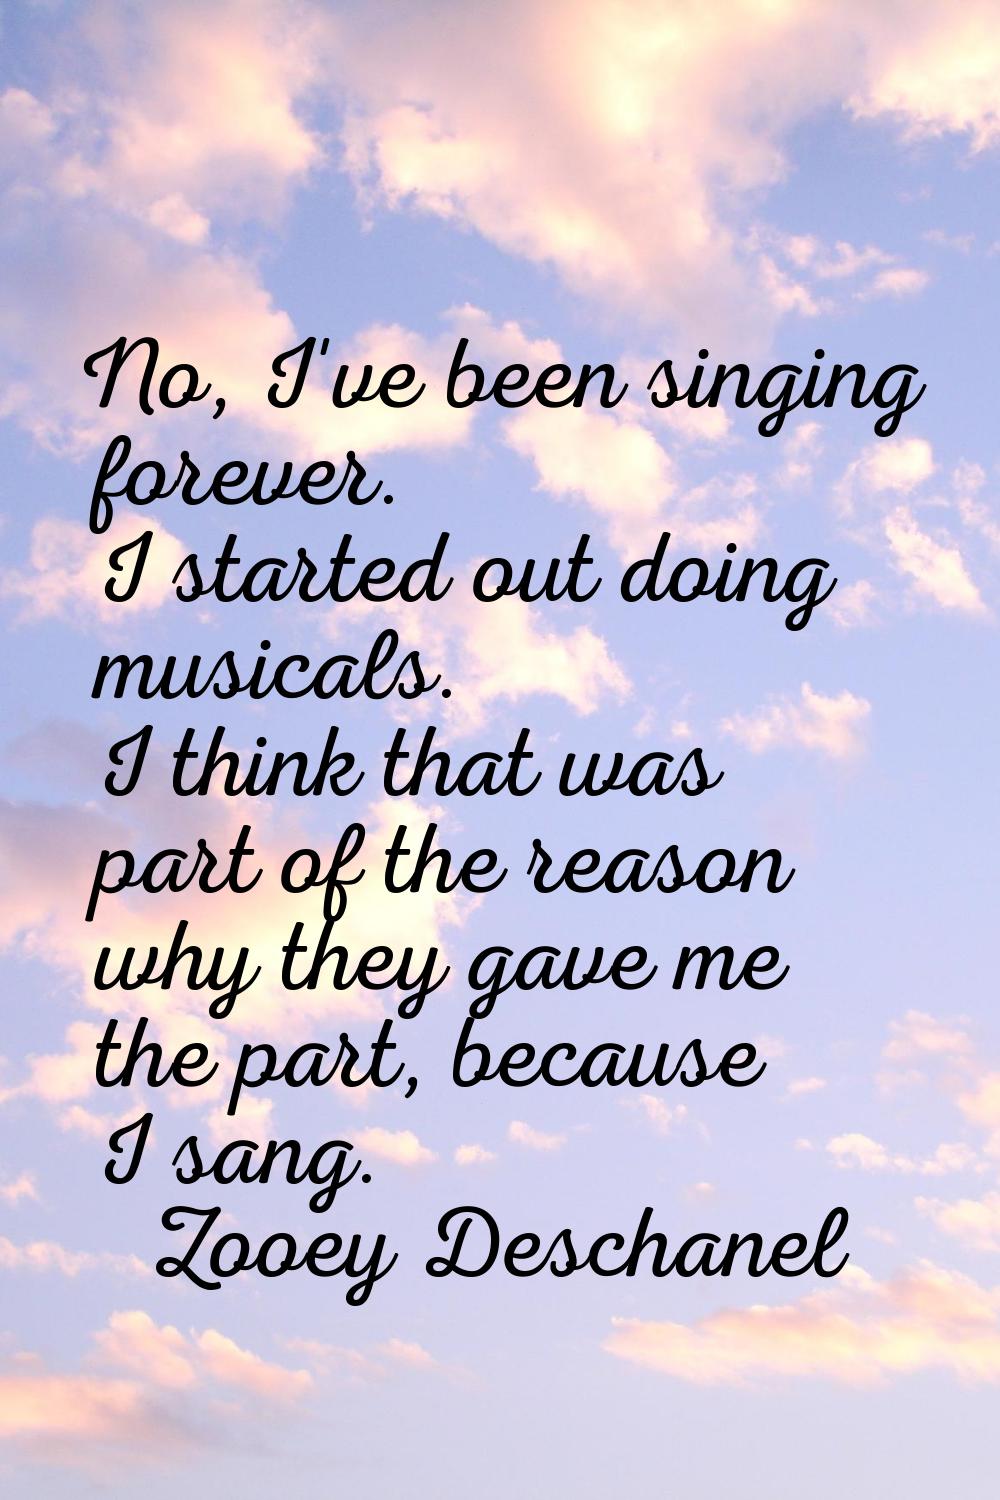 No, I've been singing forever. I started out doing musicals. I think that was part of the reason wh